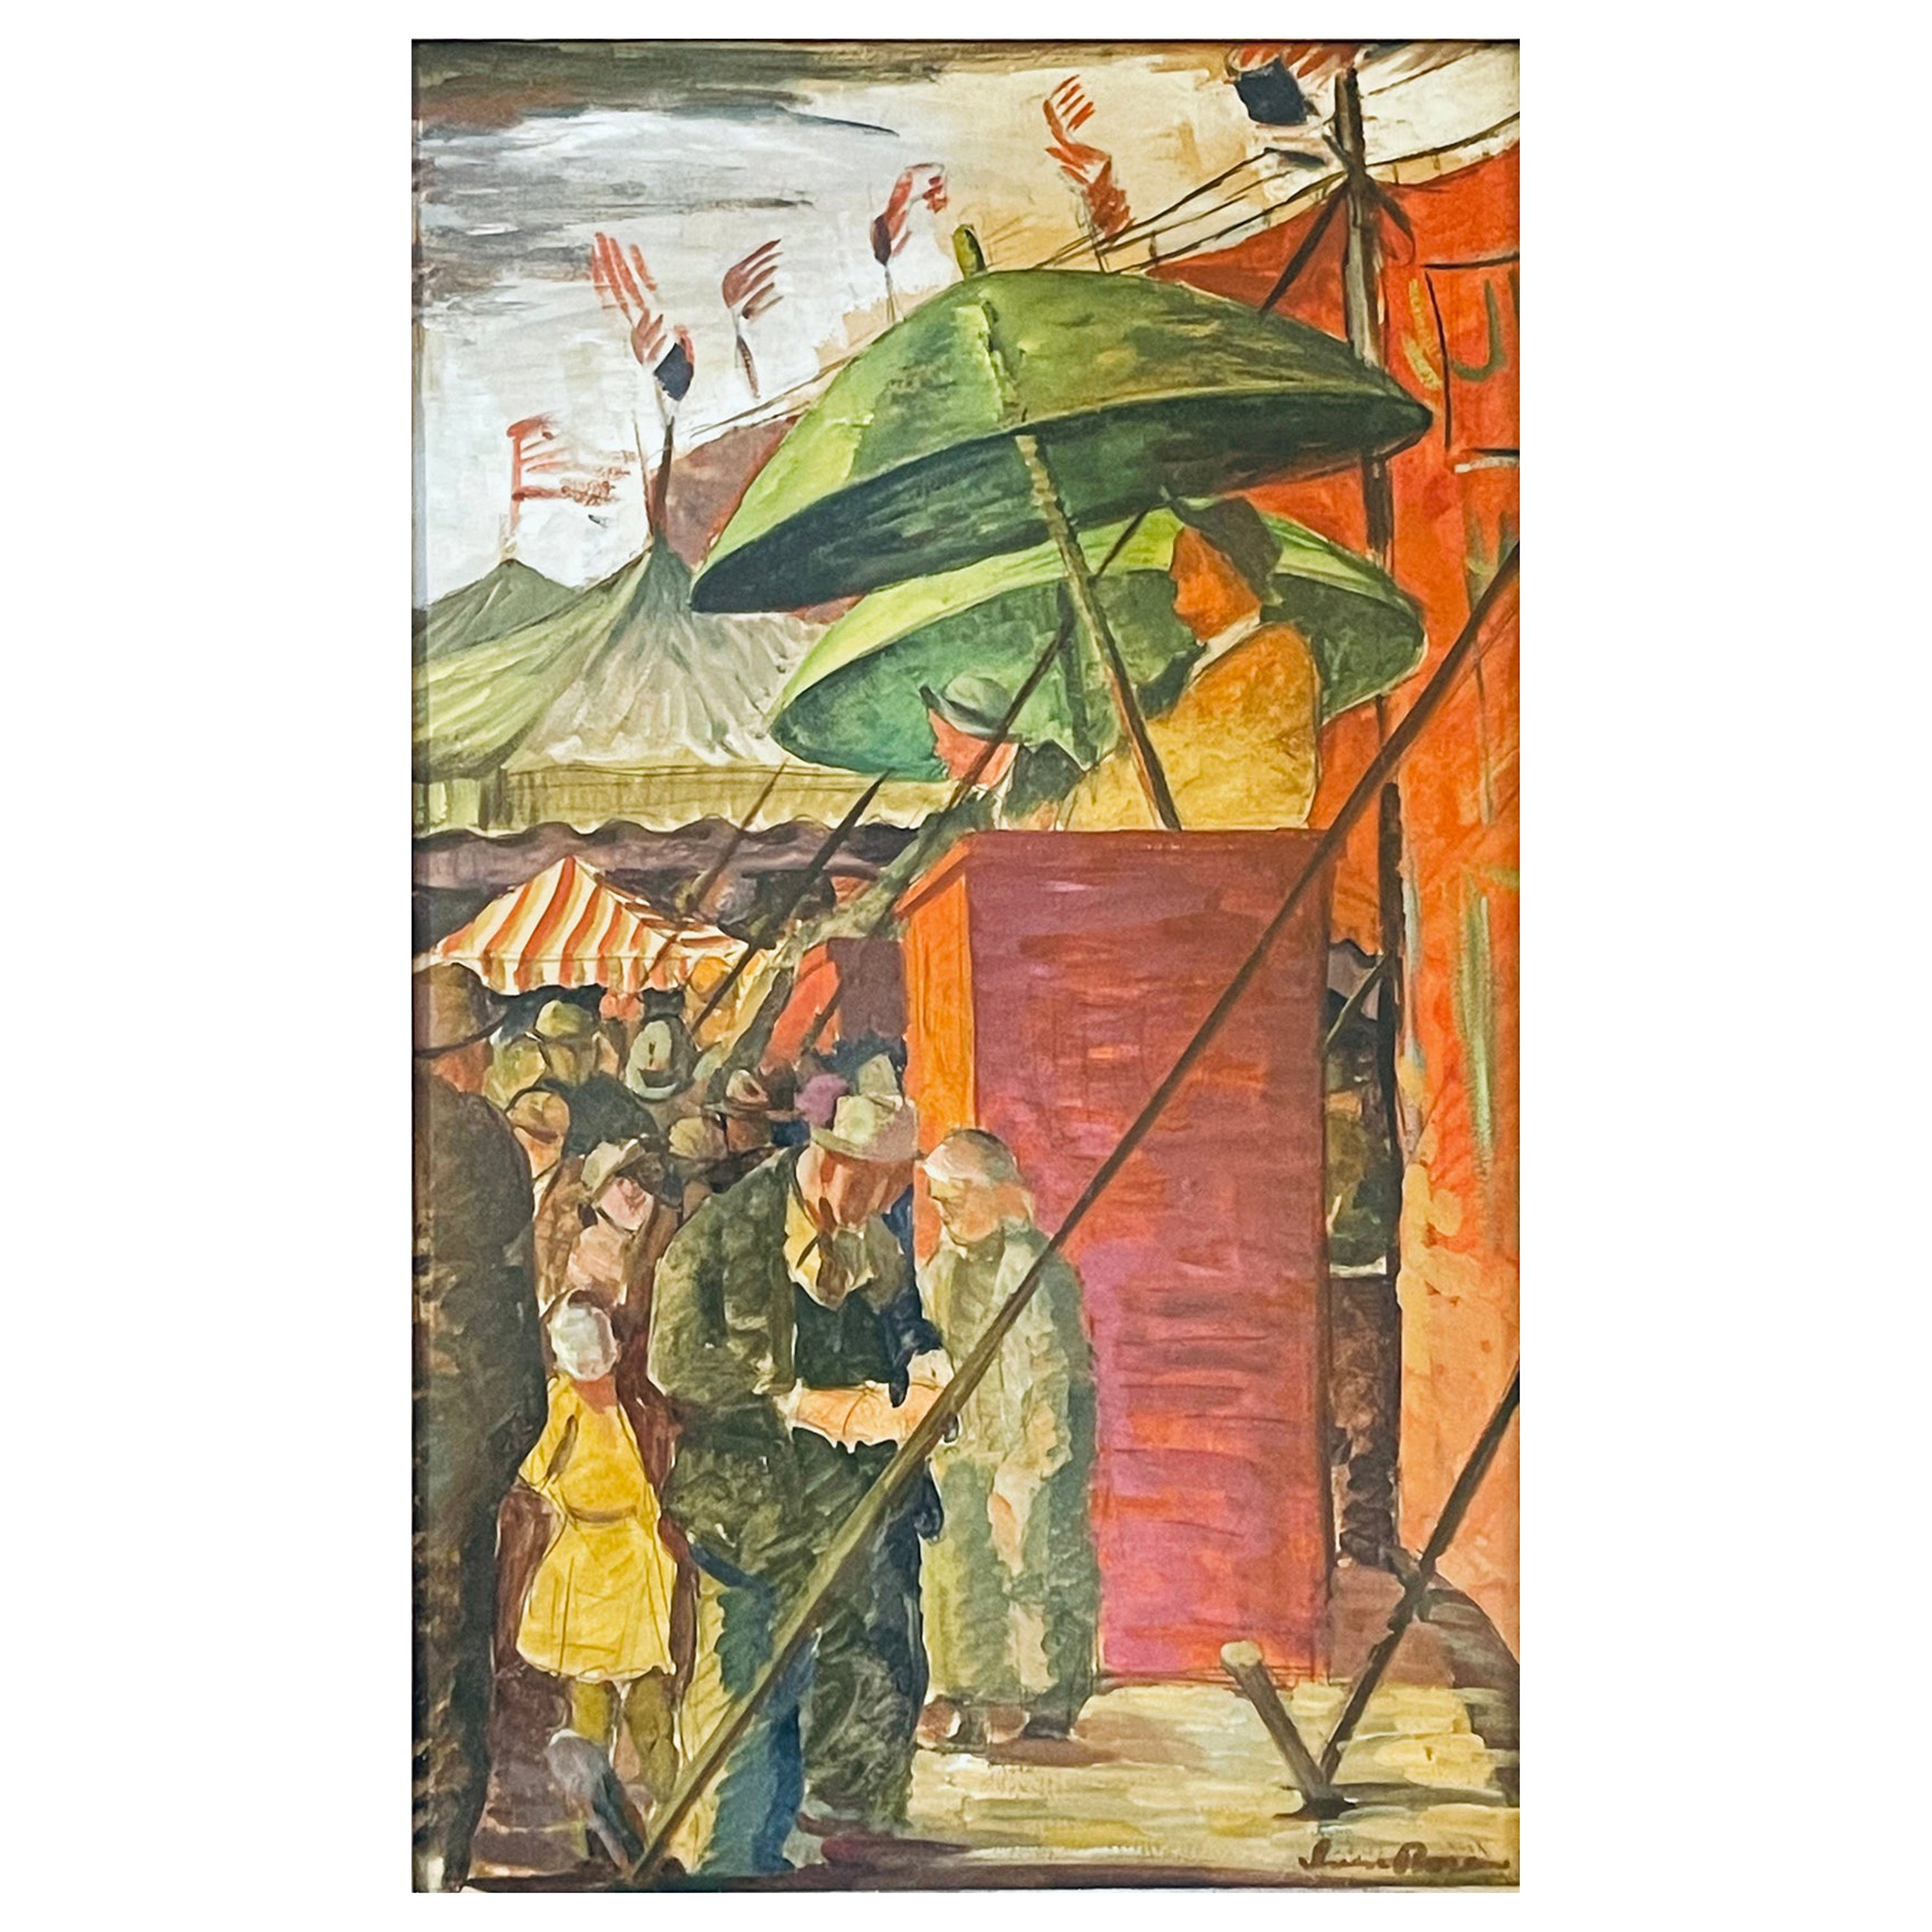 "Circus Scene, " 1930s Painting with Barker in Orange & Green, American Flags